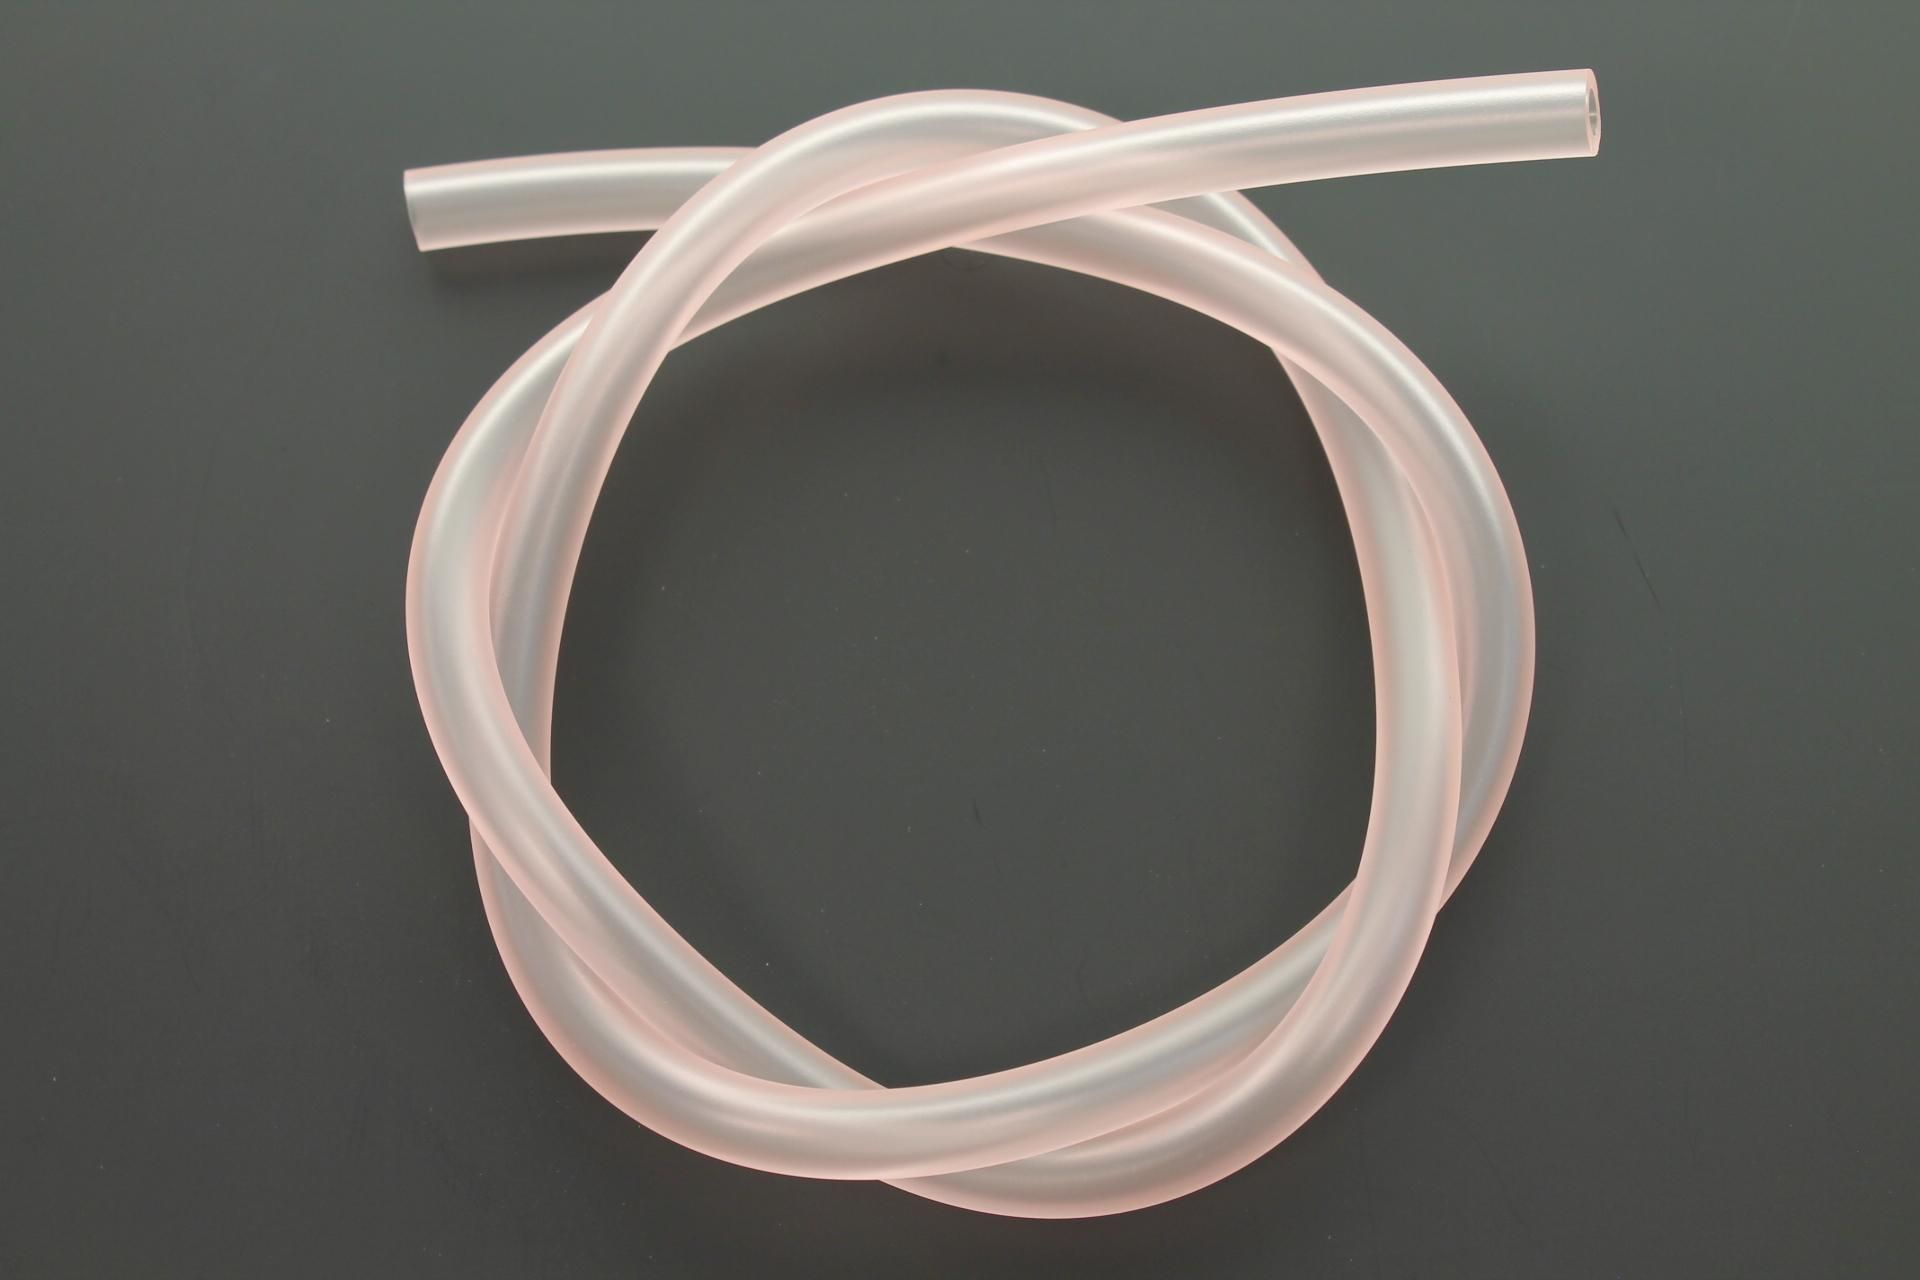 91A20-05056-00 Superseded by 91A20-05080-00 - TUBE, FLEXIBLE